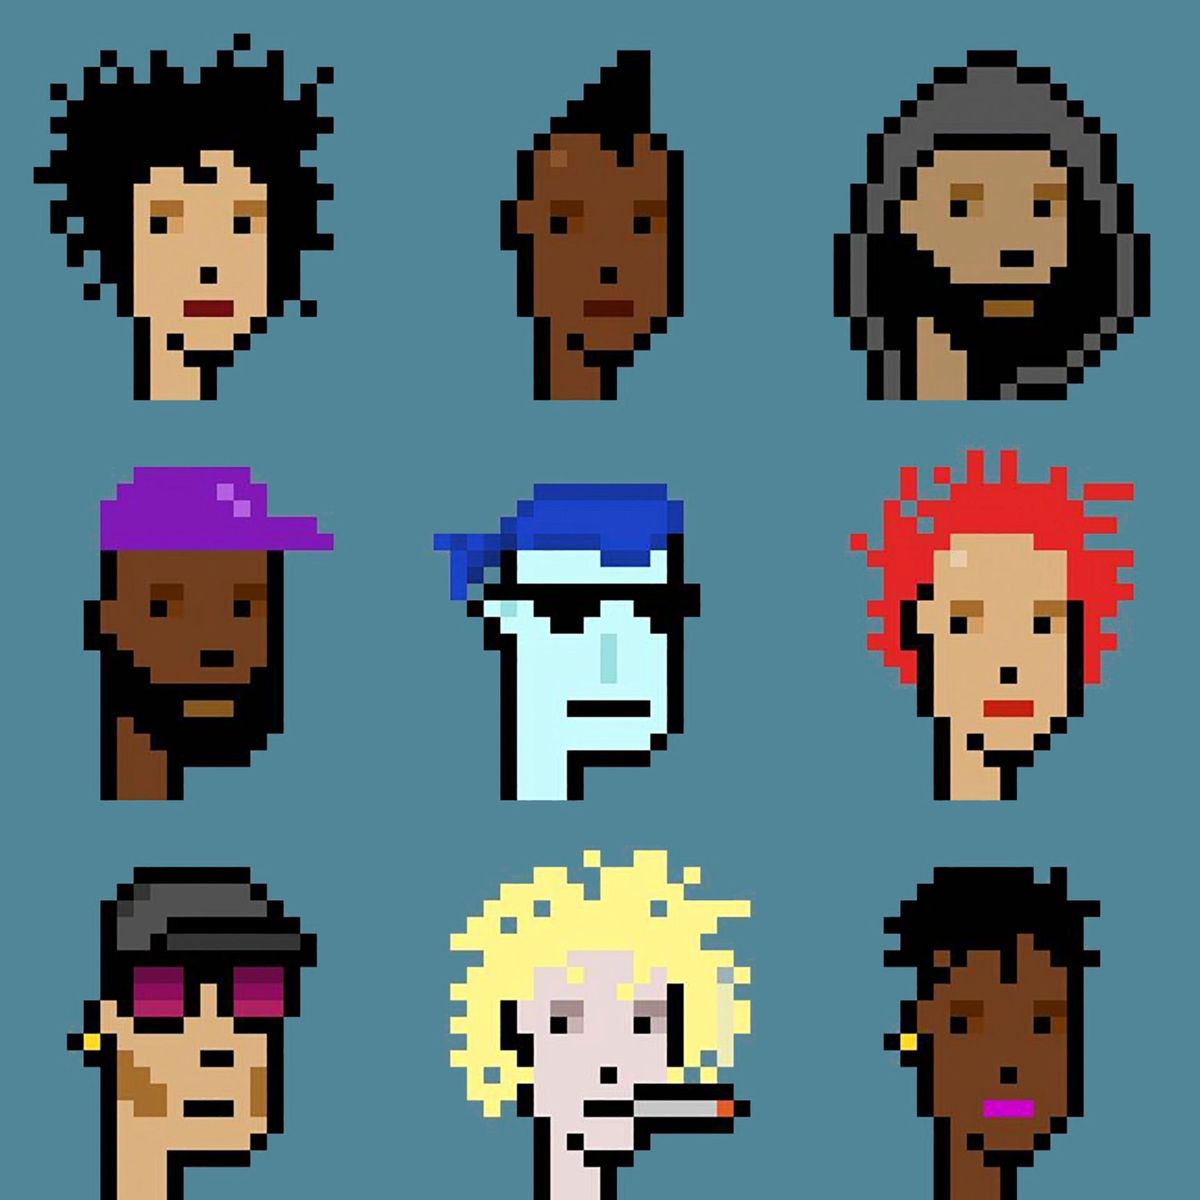 9 Cryptopunks (2, 532 , 58, 30, 635, 602, 768, 603 and 757) made in 2017. In June 2021 Sotheby's sold a single Cryptopunk NFT, #7523, for $11.8m Courtesy of Christie's